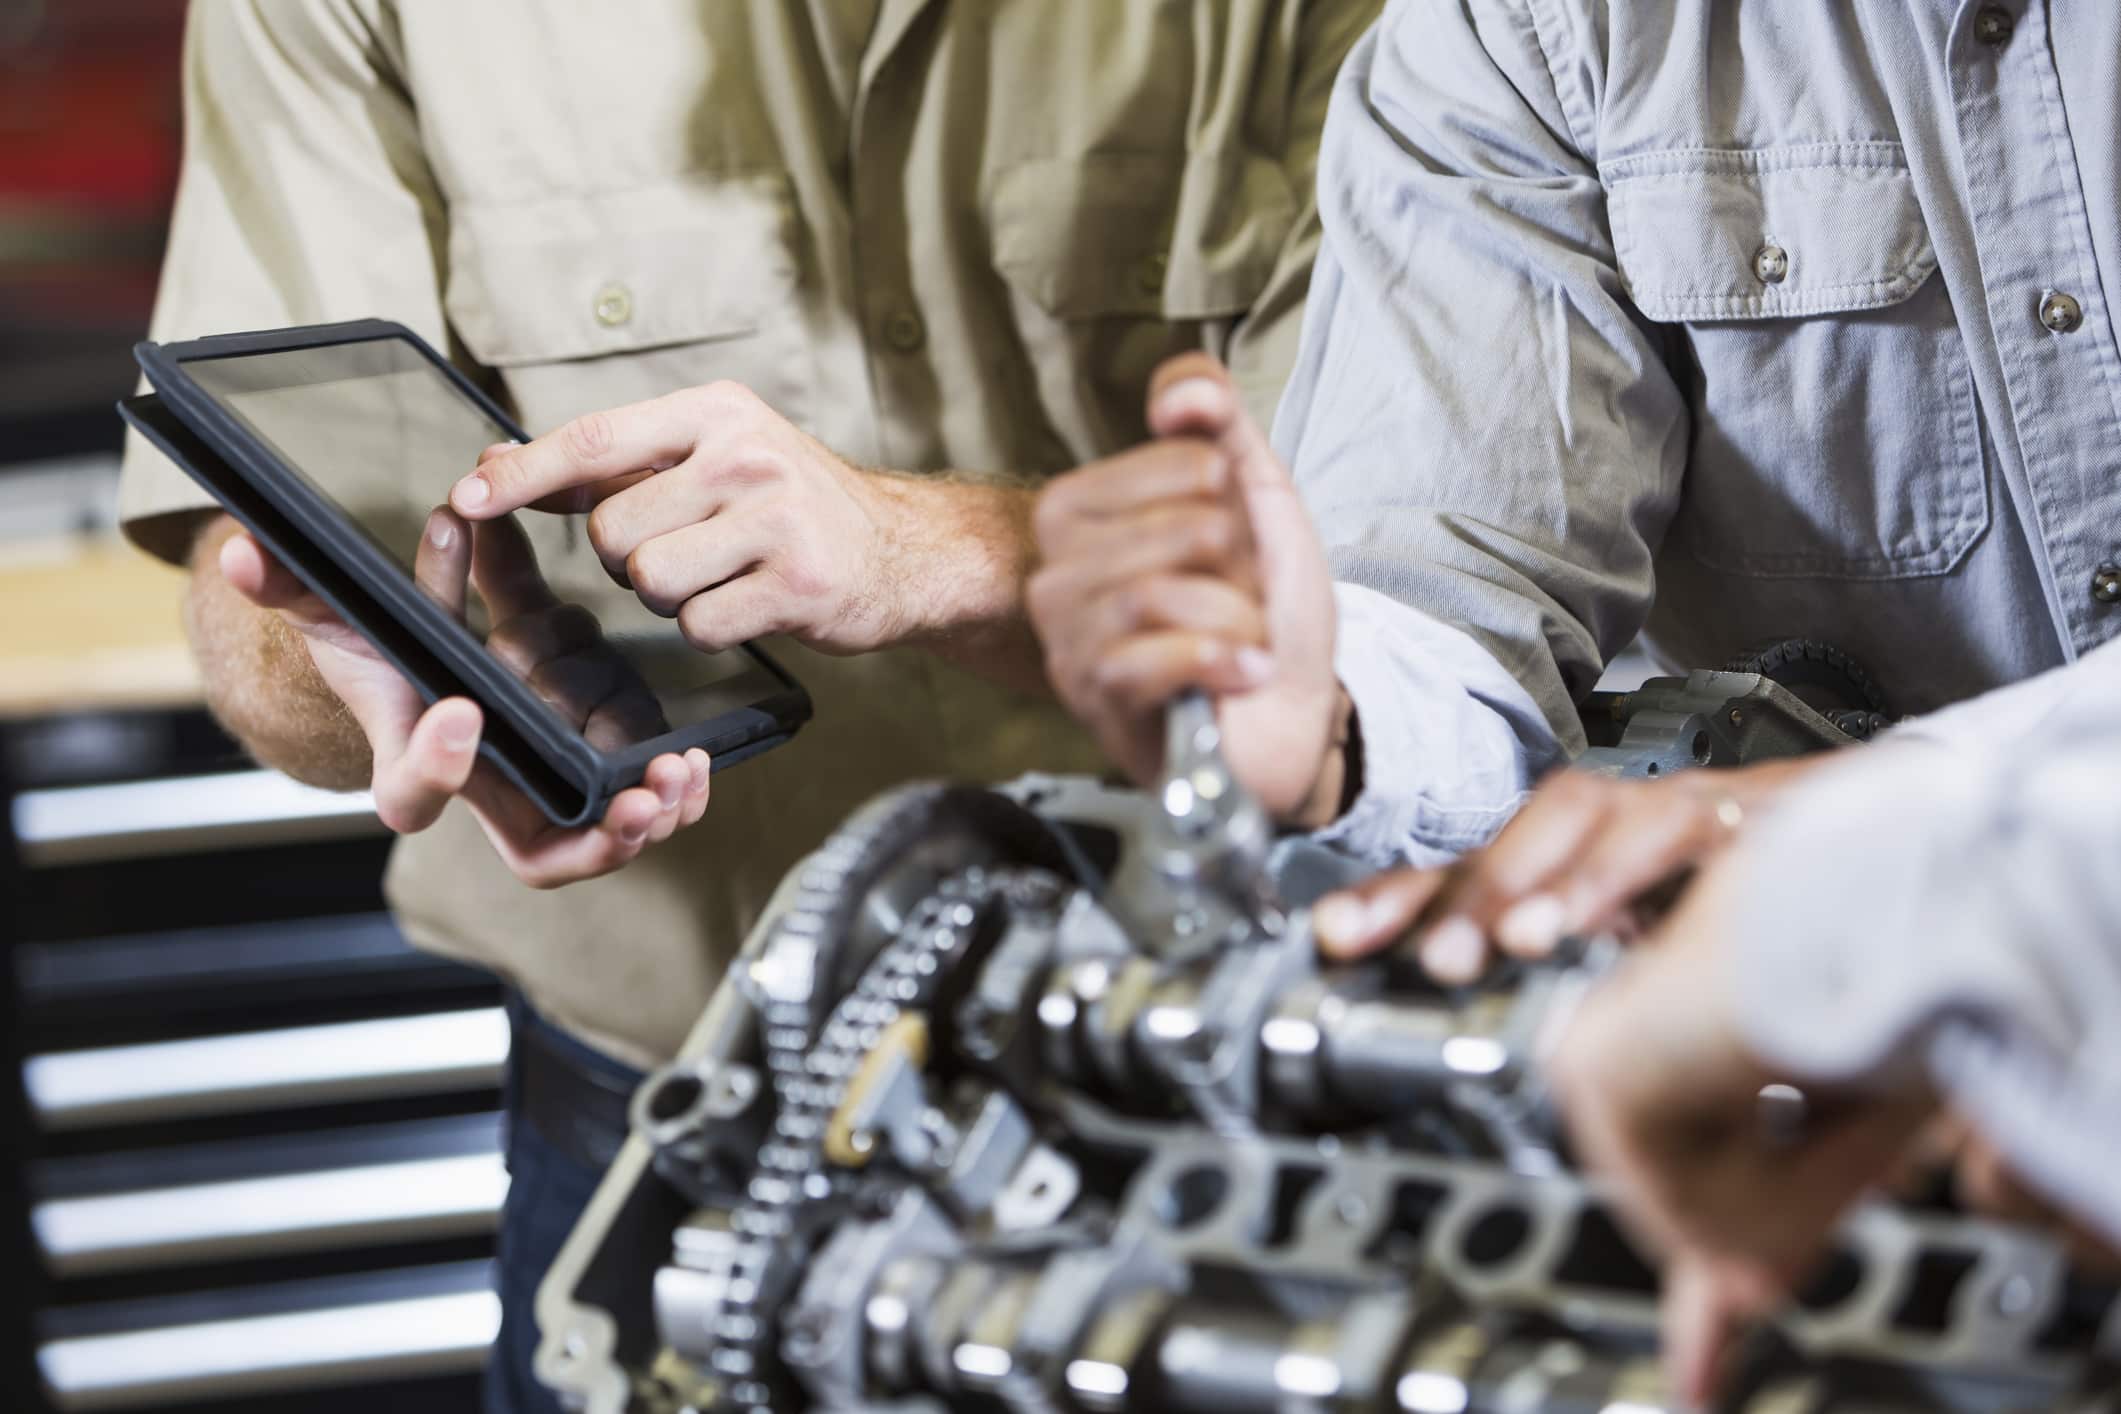 Cropped view of a group of mechanics working on a car engine. The men are unrecognizable, with arms and midsections showing. The man on the left is using a digital tablet.